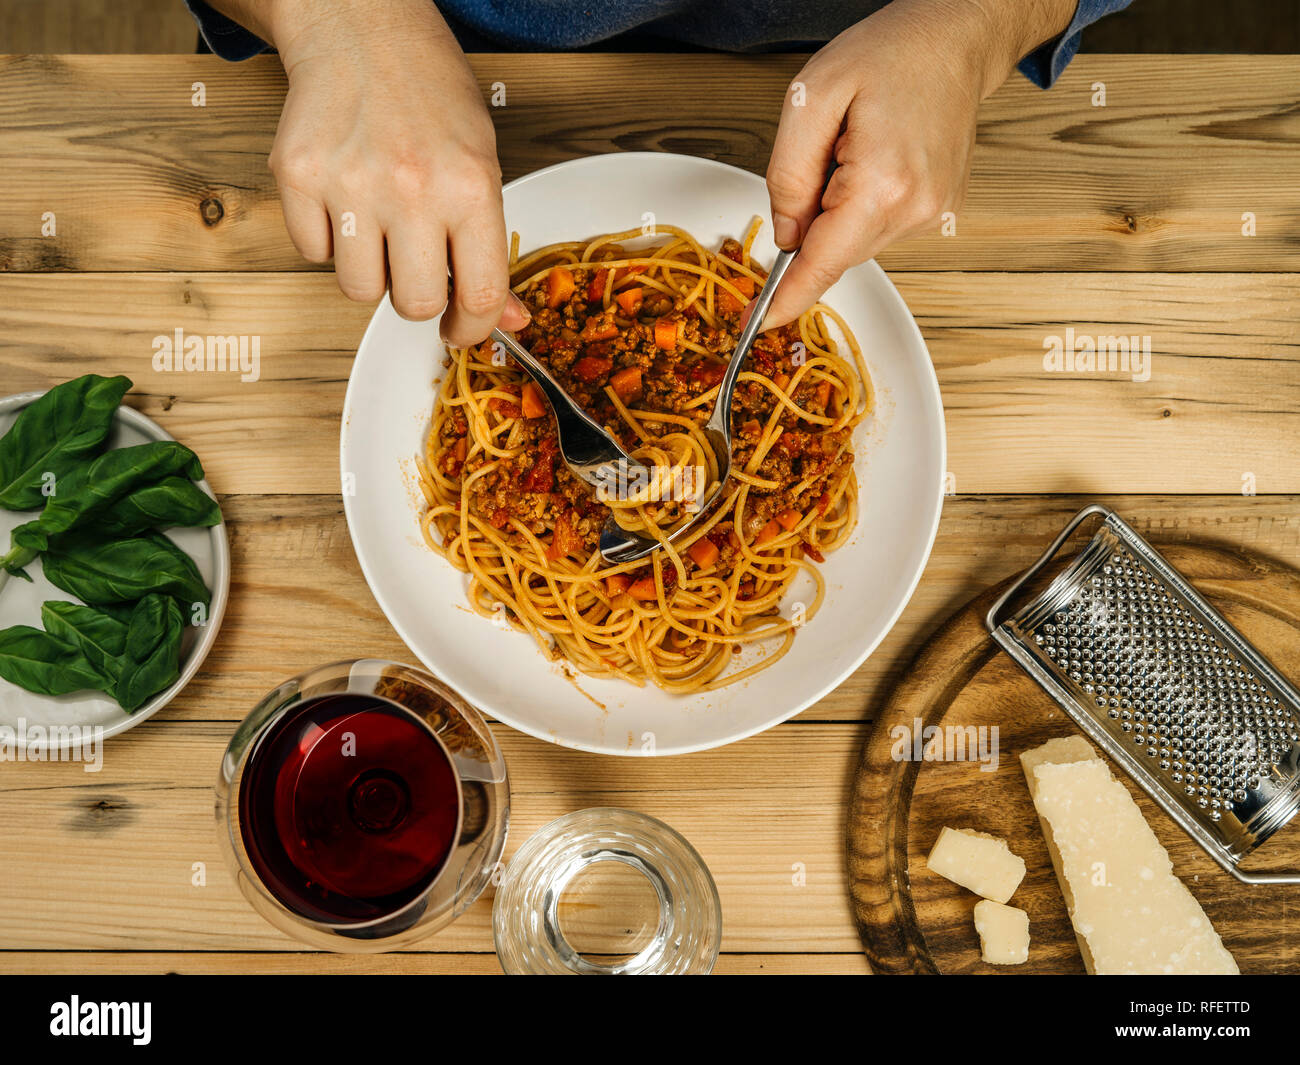 Photo of a plate of traditional spaghetti bolognese and glass of red wine from above. Stock Photo